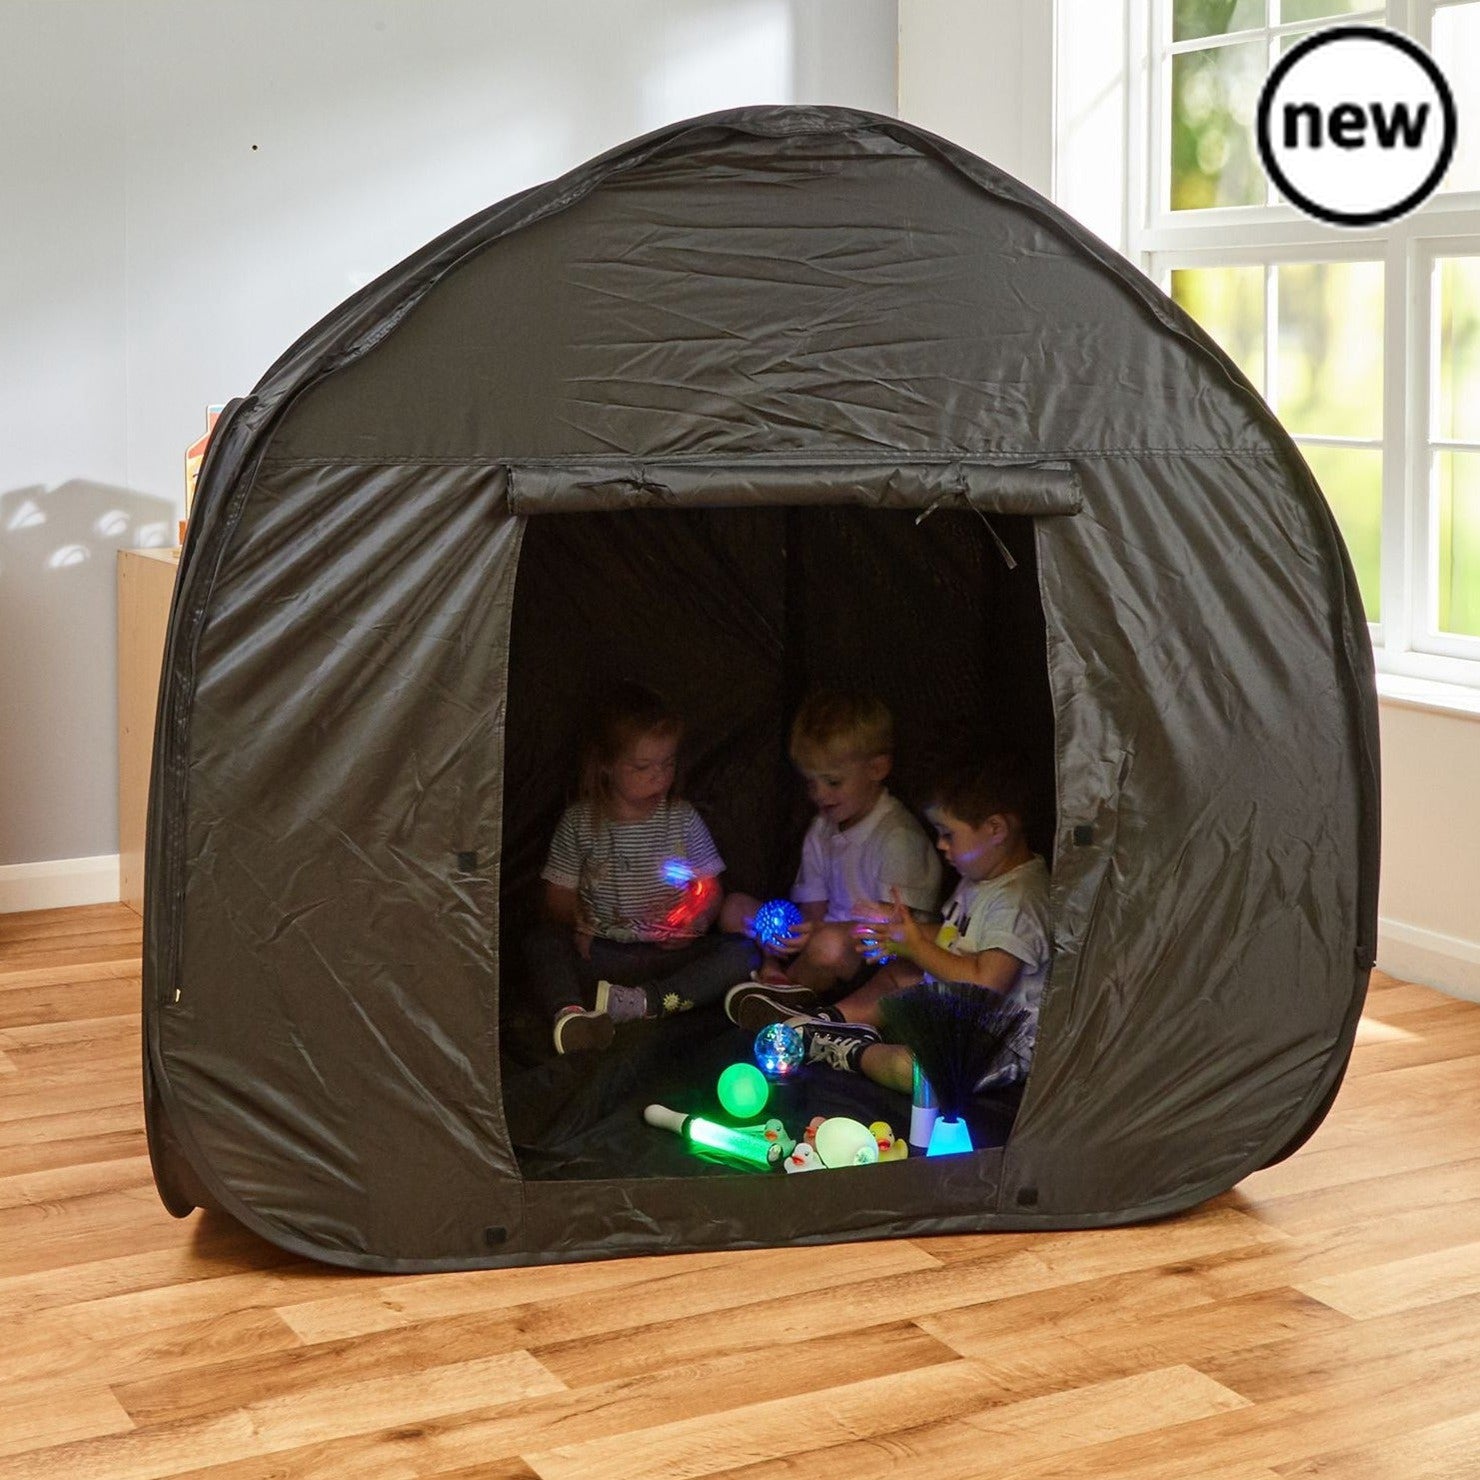 Black Dark Den, This fantastic pop-up sensory dark den pod is ideal for environments where a full sensory room is not available. Suitable for multiple users, the Dark Den Pod creates a temporary sensory room, with flaps which can tie up to create an open doorway into the area. Ideal for use with projectors and light sources, the double layered black environment creates a safe and enclosed area for sensory exploration. The Dark Den Pod is modular and can be easily joined with other Pods - perfect for creatin